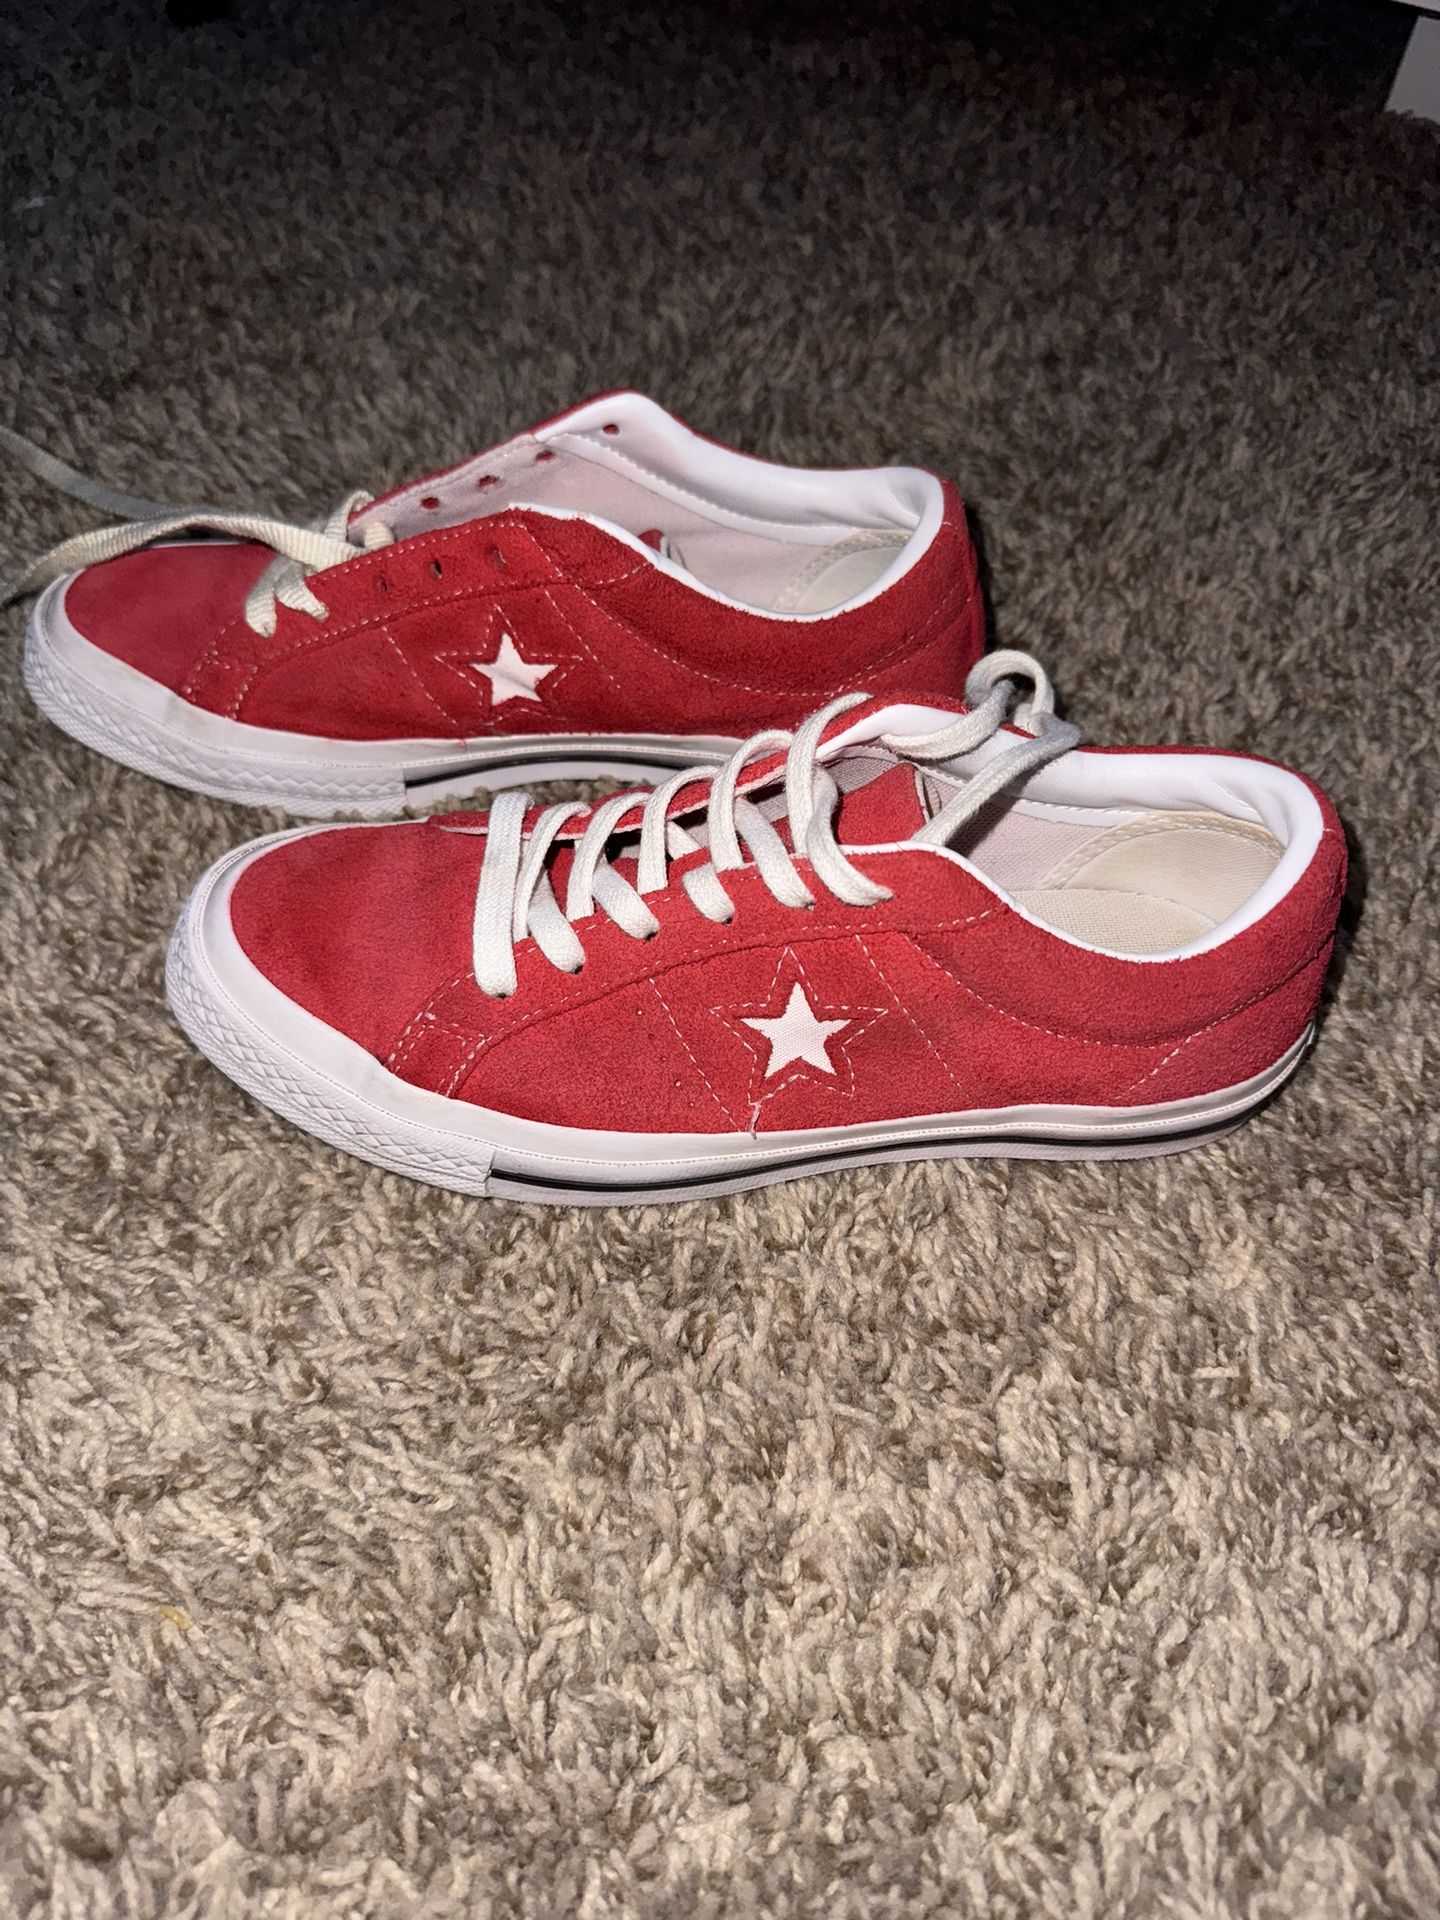 Converse One Star Ox In Red Suede 